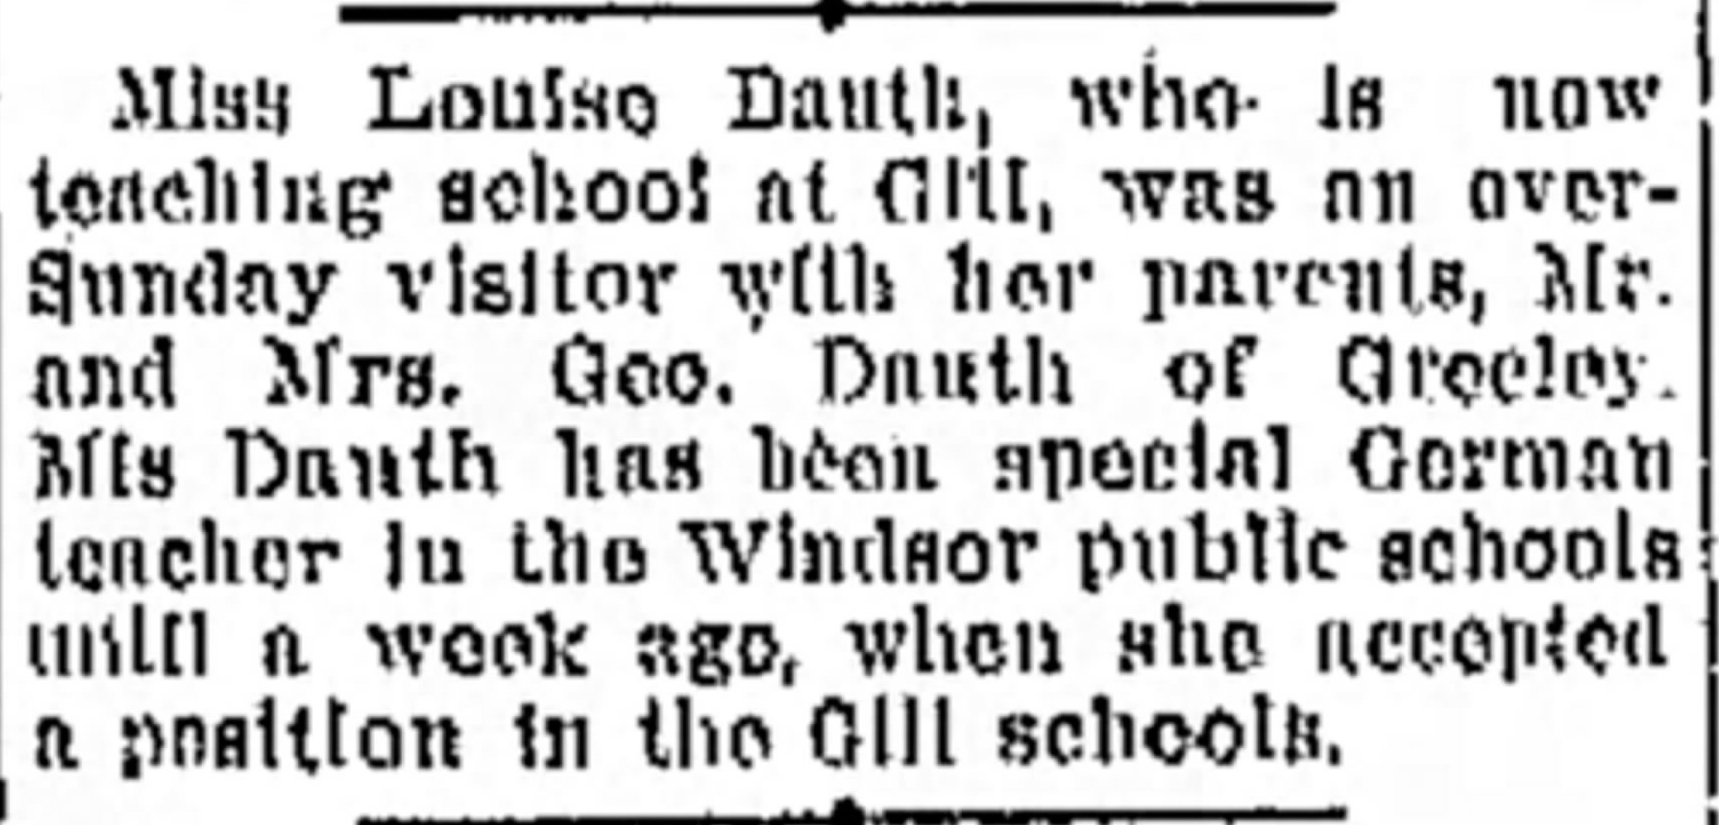 Dauth Family Archive - 1916-03-20 - Greeley Daily Tribune - Louise Dauth Teaching At Gill